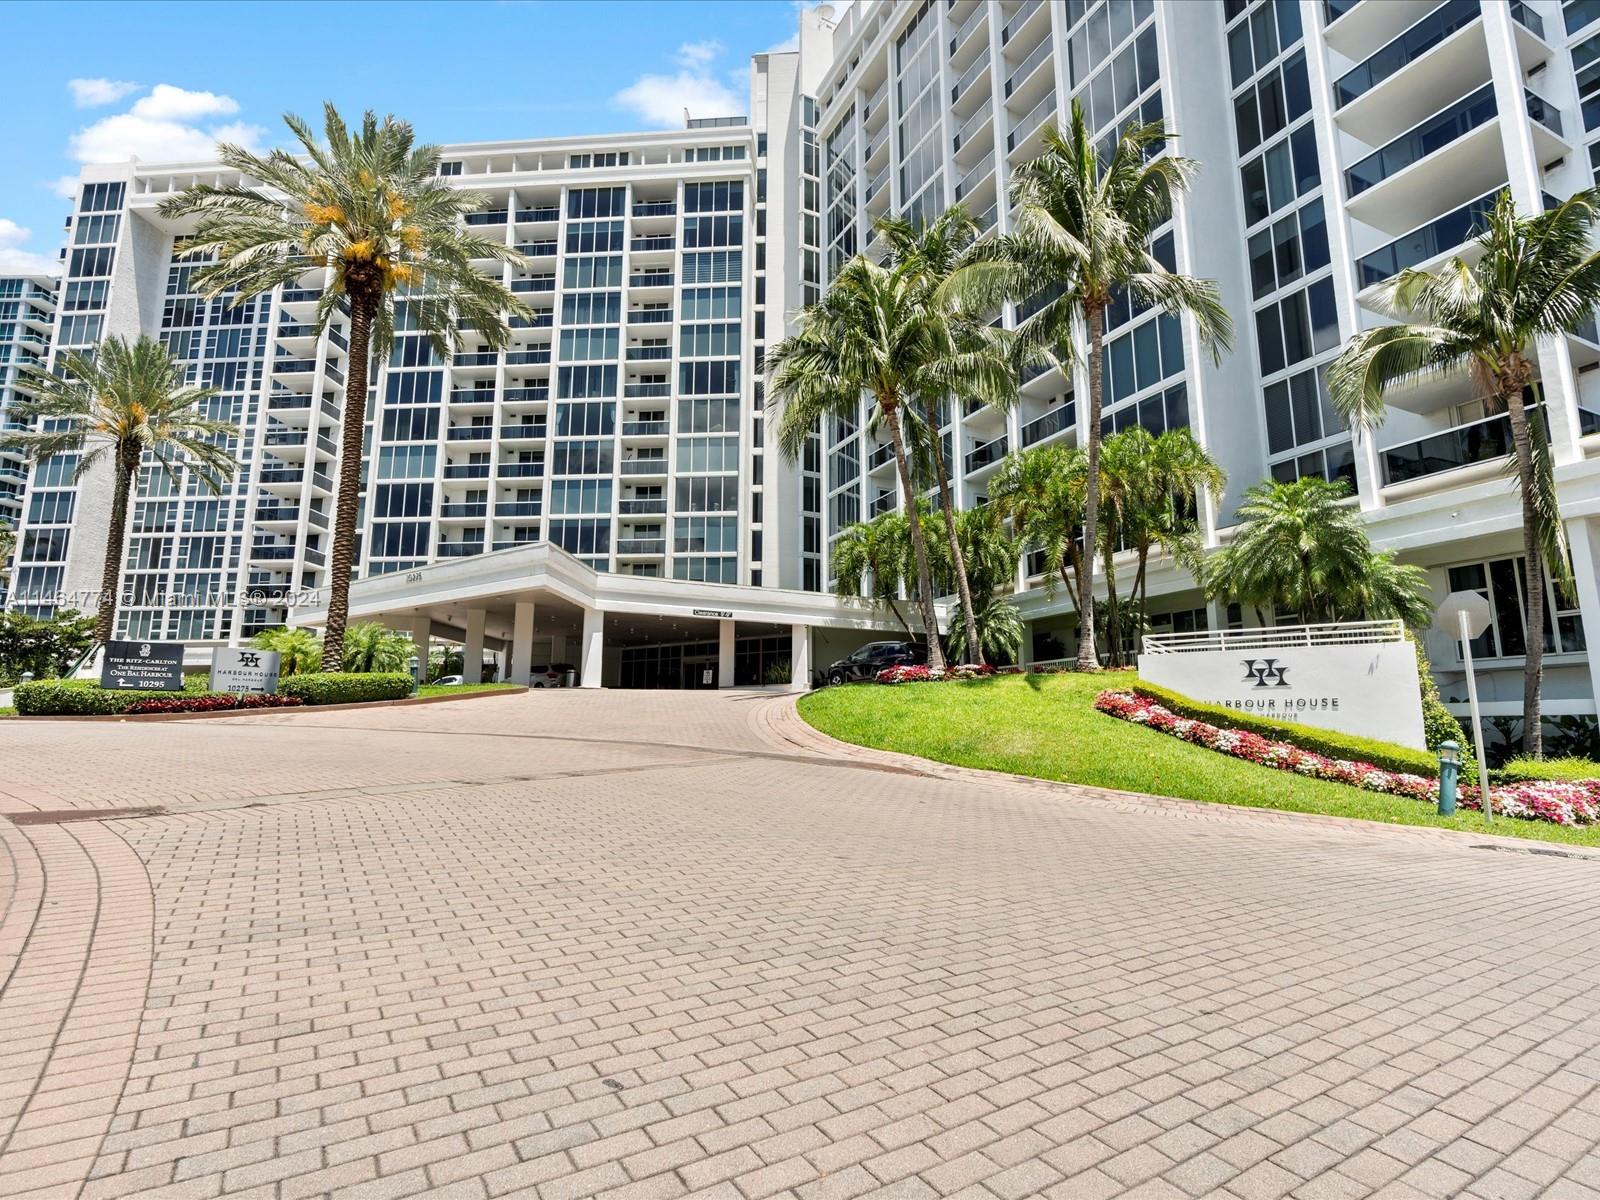 Stunning 1 bedroom in the Harbour House. Spacious and open, this condo is flooded with natural light and beautiful intracoastal views. The unit comes complete with open kitchen, wood floors, floor to ceiling windows, custom closet systems and so much more. Harbour House is a full service building with resort amenities including state of the art gym, pool with cabanas, beach service, and cafe. Unit comes furnished.